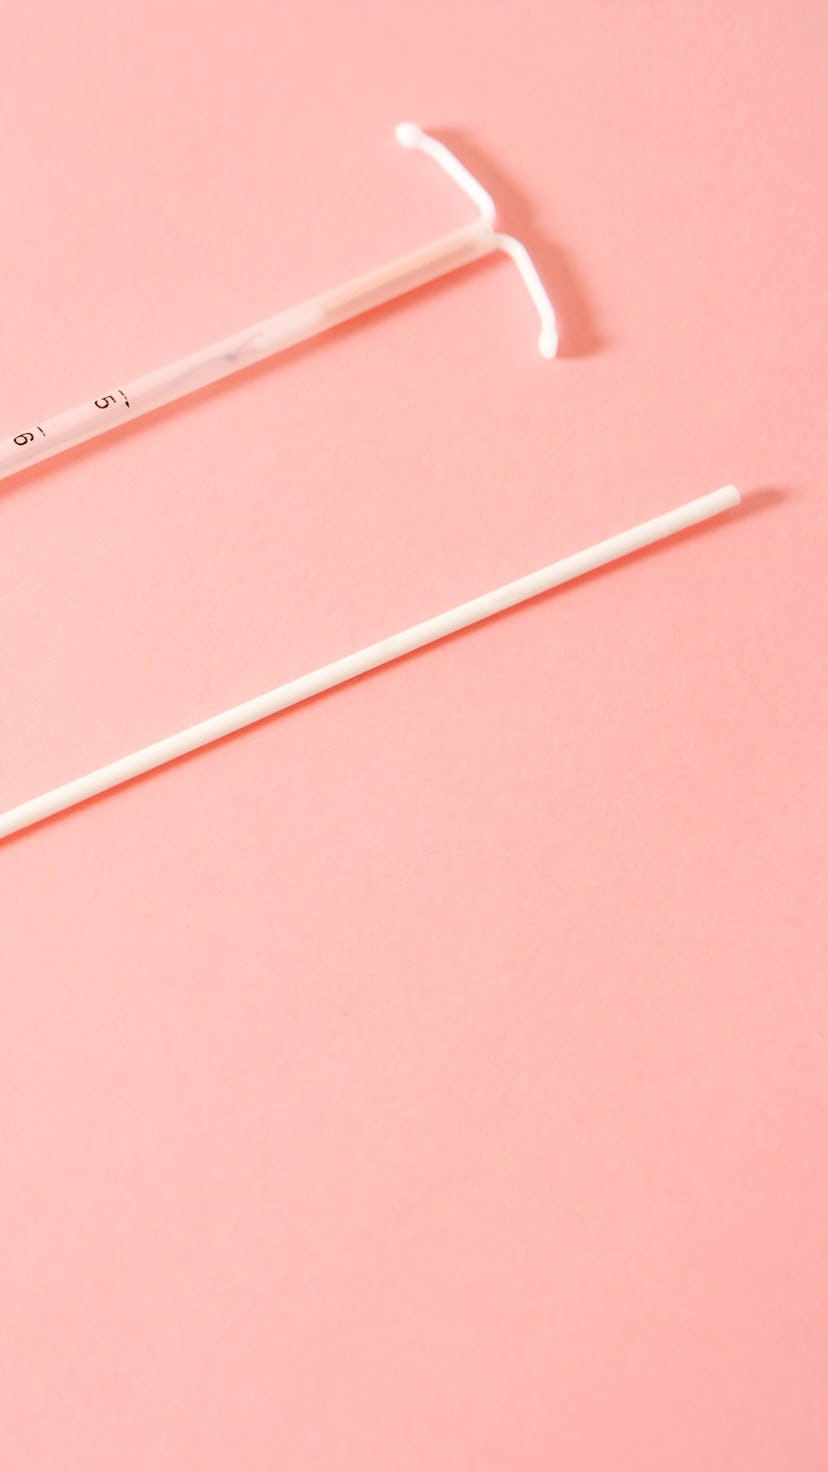 An IUD on a pink background.